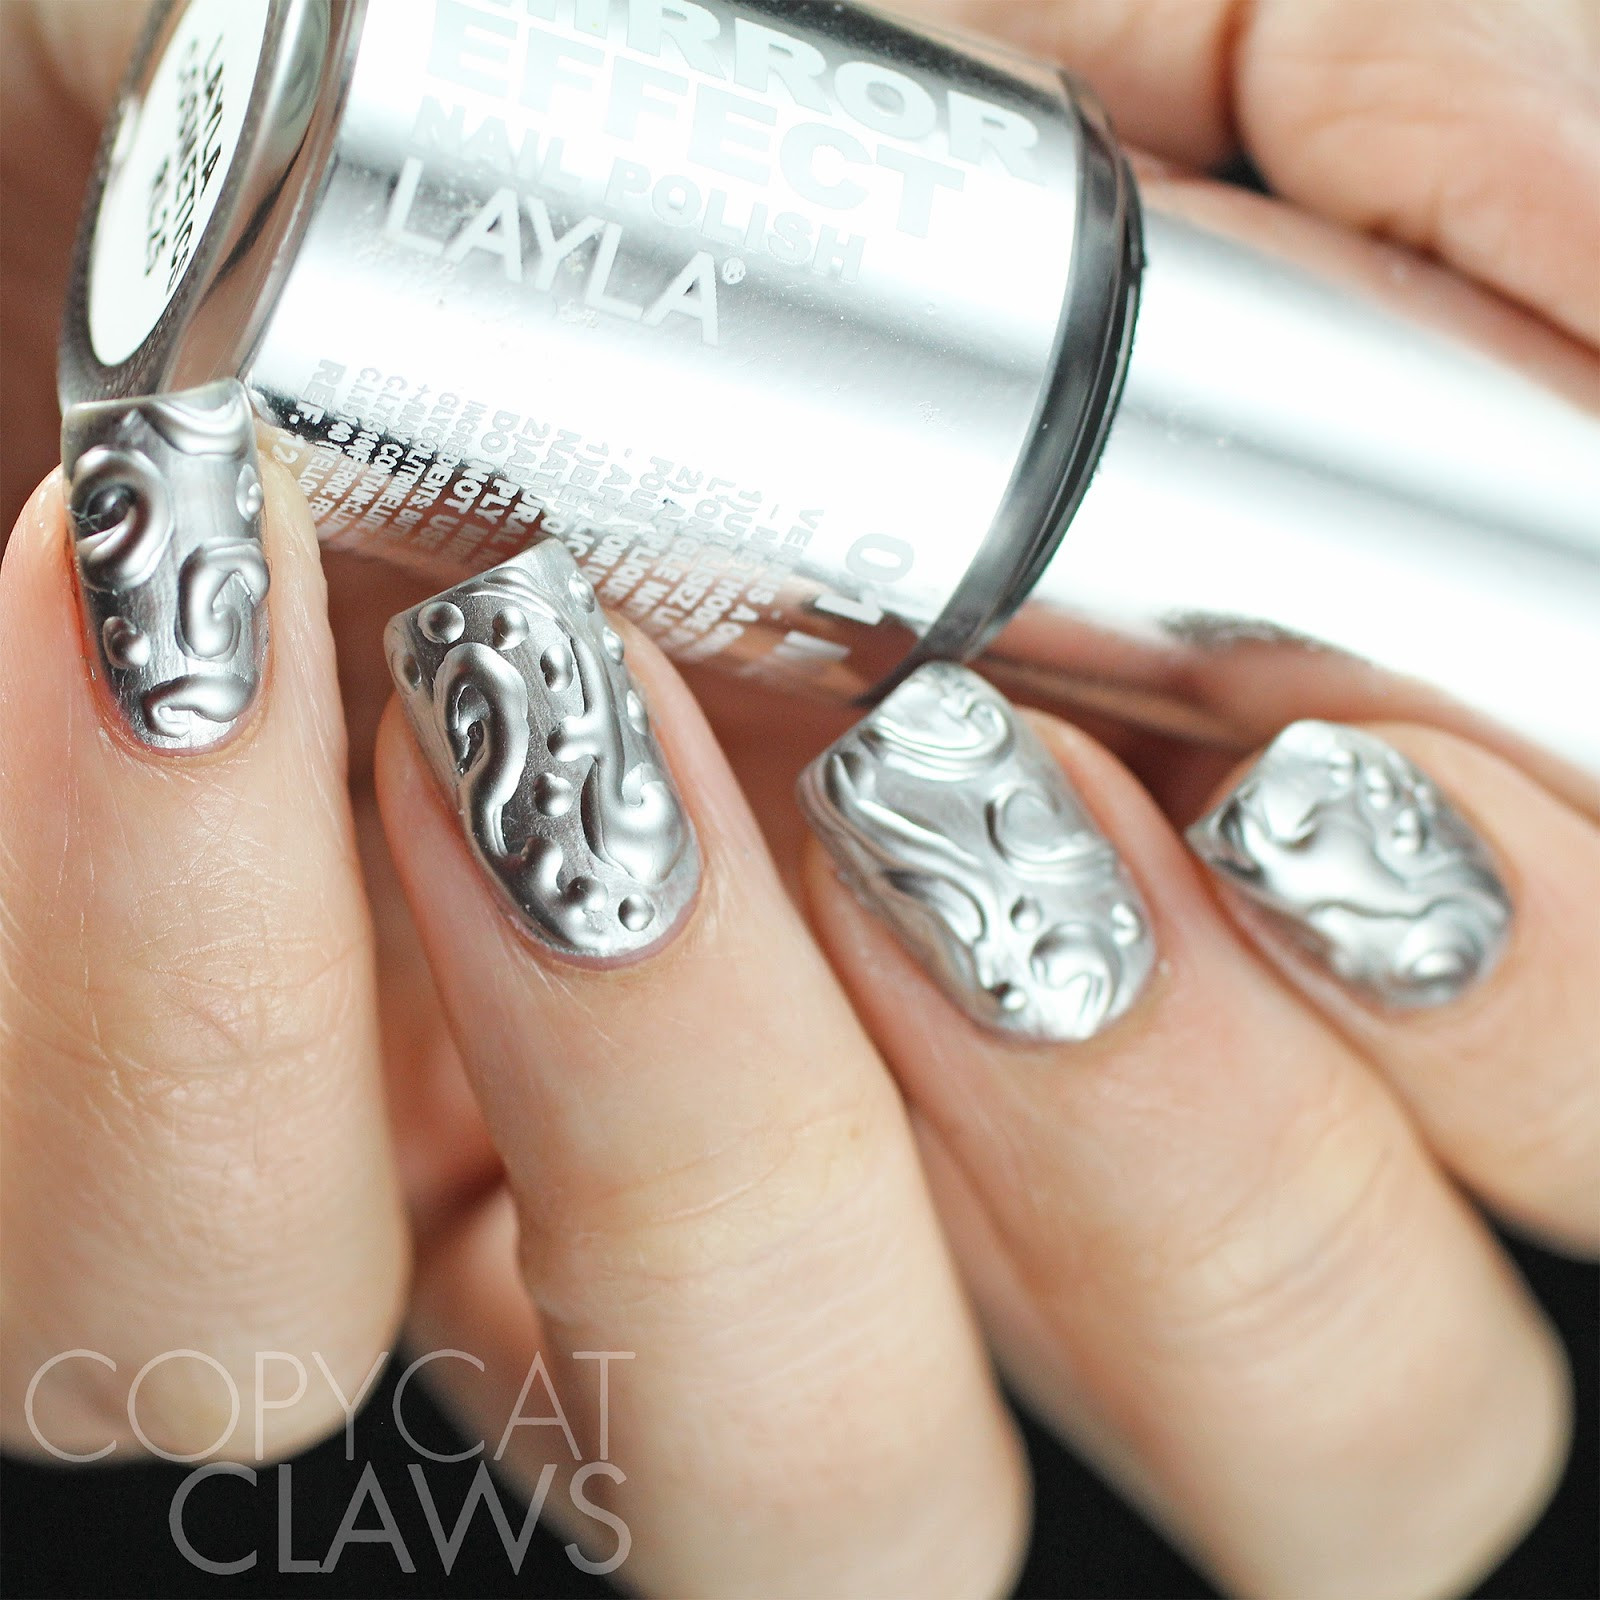 Metallic Nail Designs
 Copycat Claws The Digit al Dozen does New & Improved